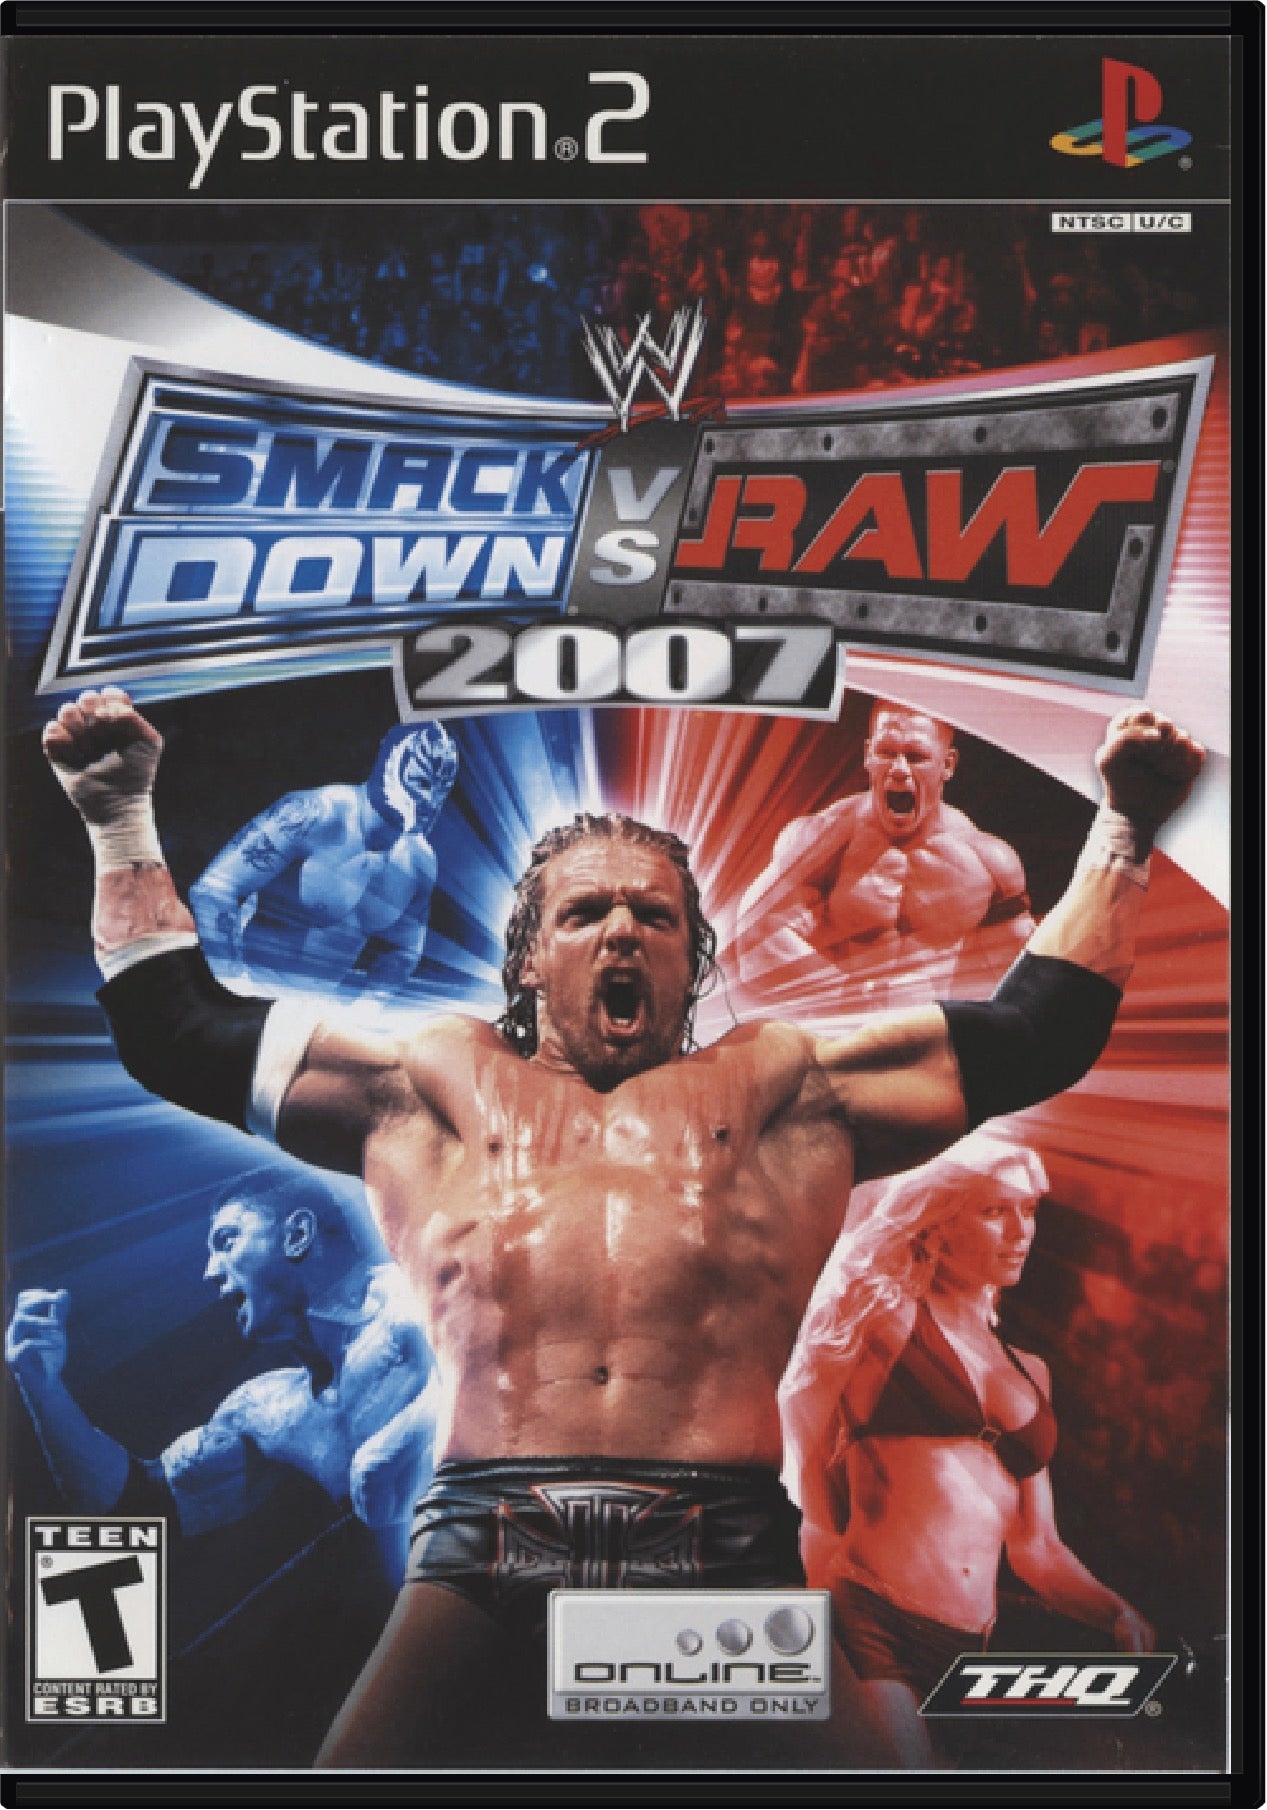 WWE Smackdown vs Raw 2007 Cover Art and Product Photo